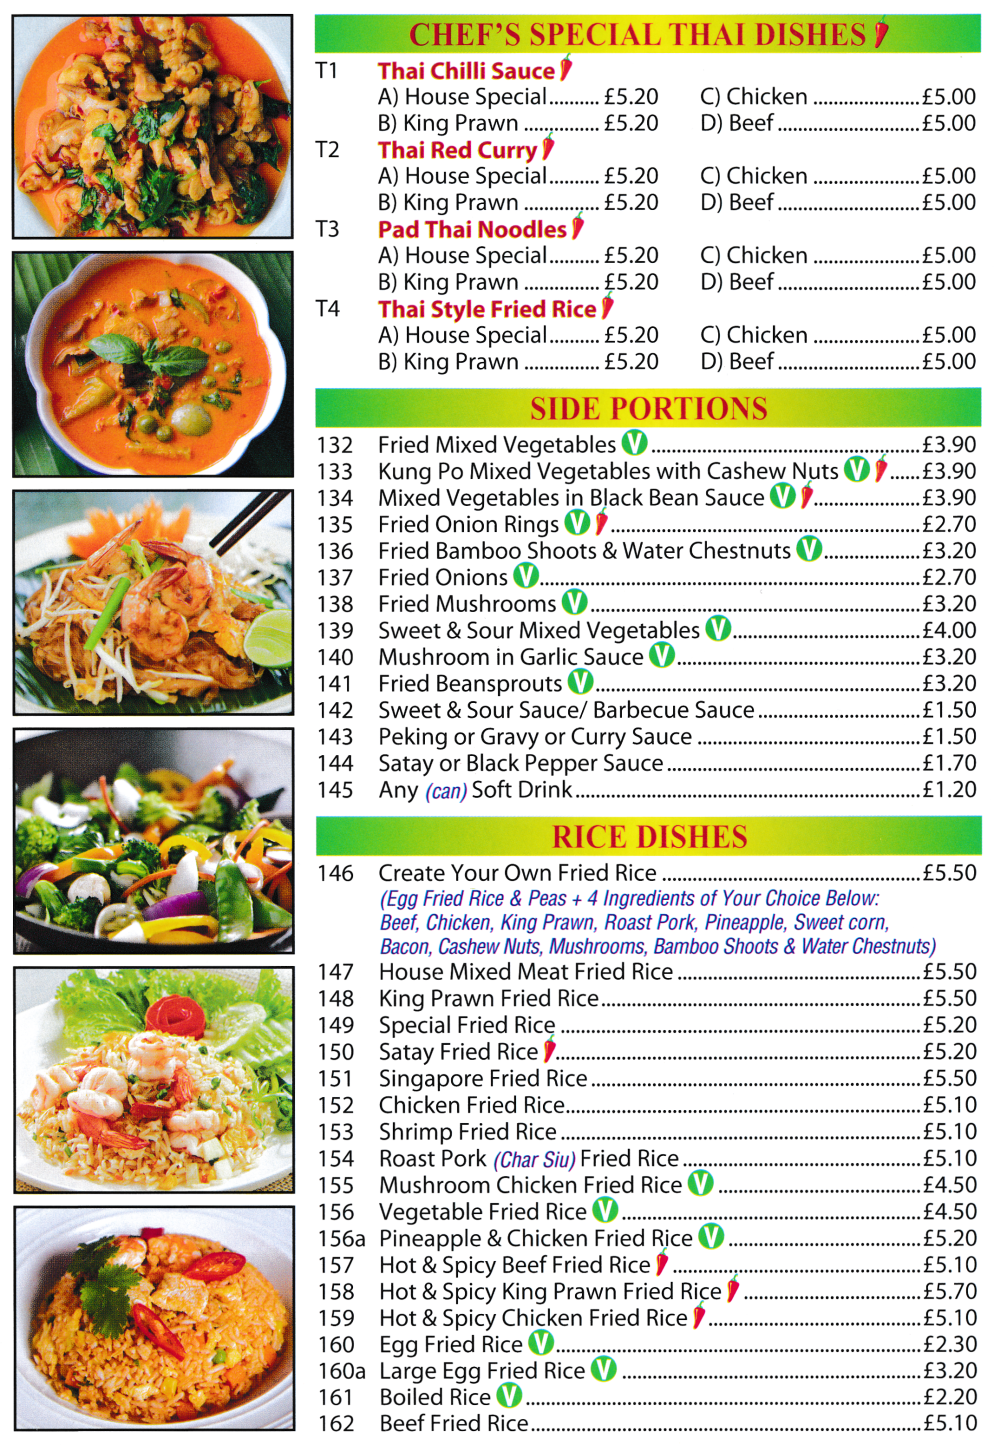 Menu for China Palace - Thai Style Fried Rice, Thai Red Curry, Pad Thai Noodles, Singapore Fried Rice..